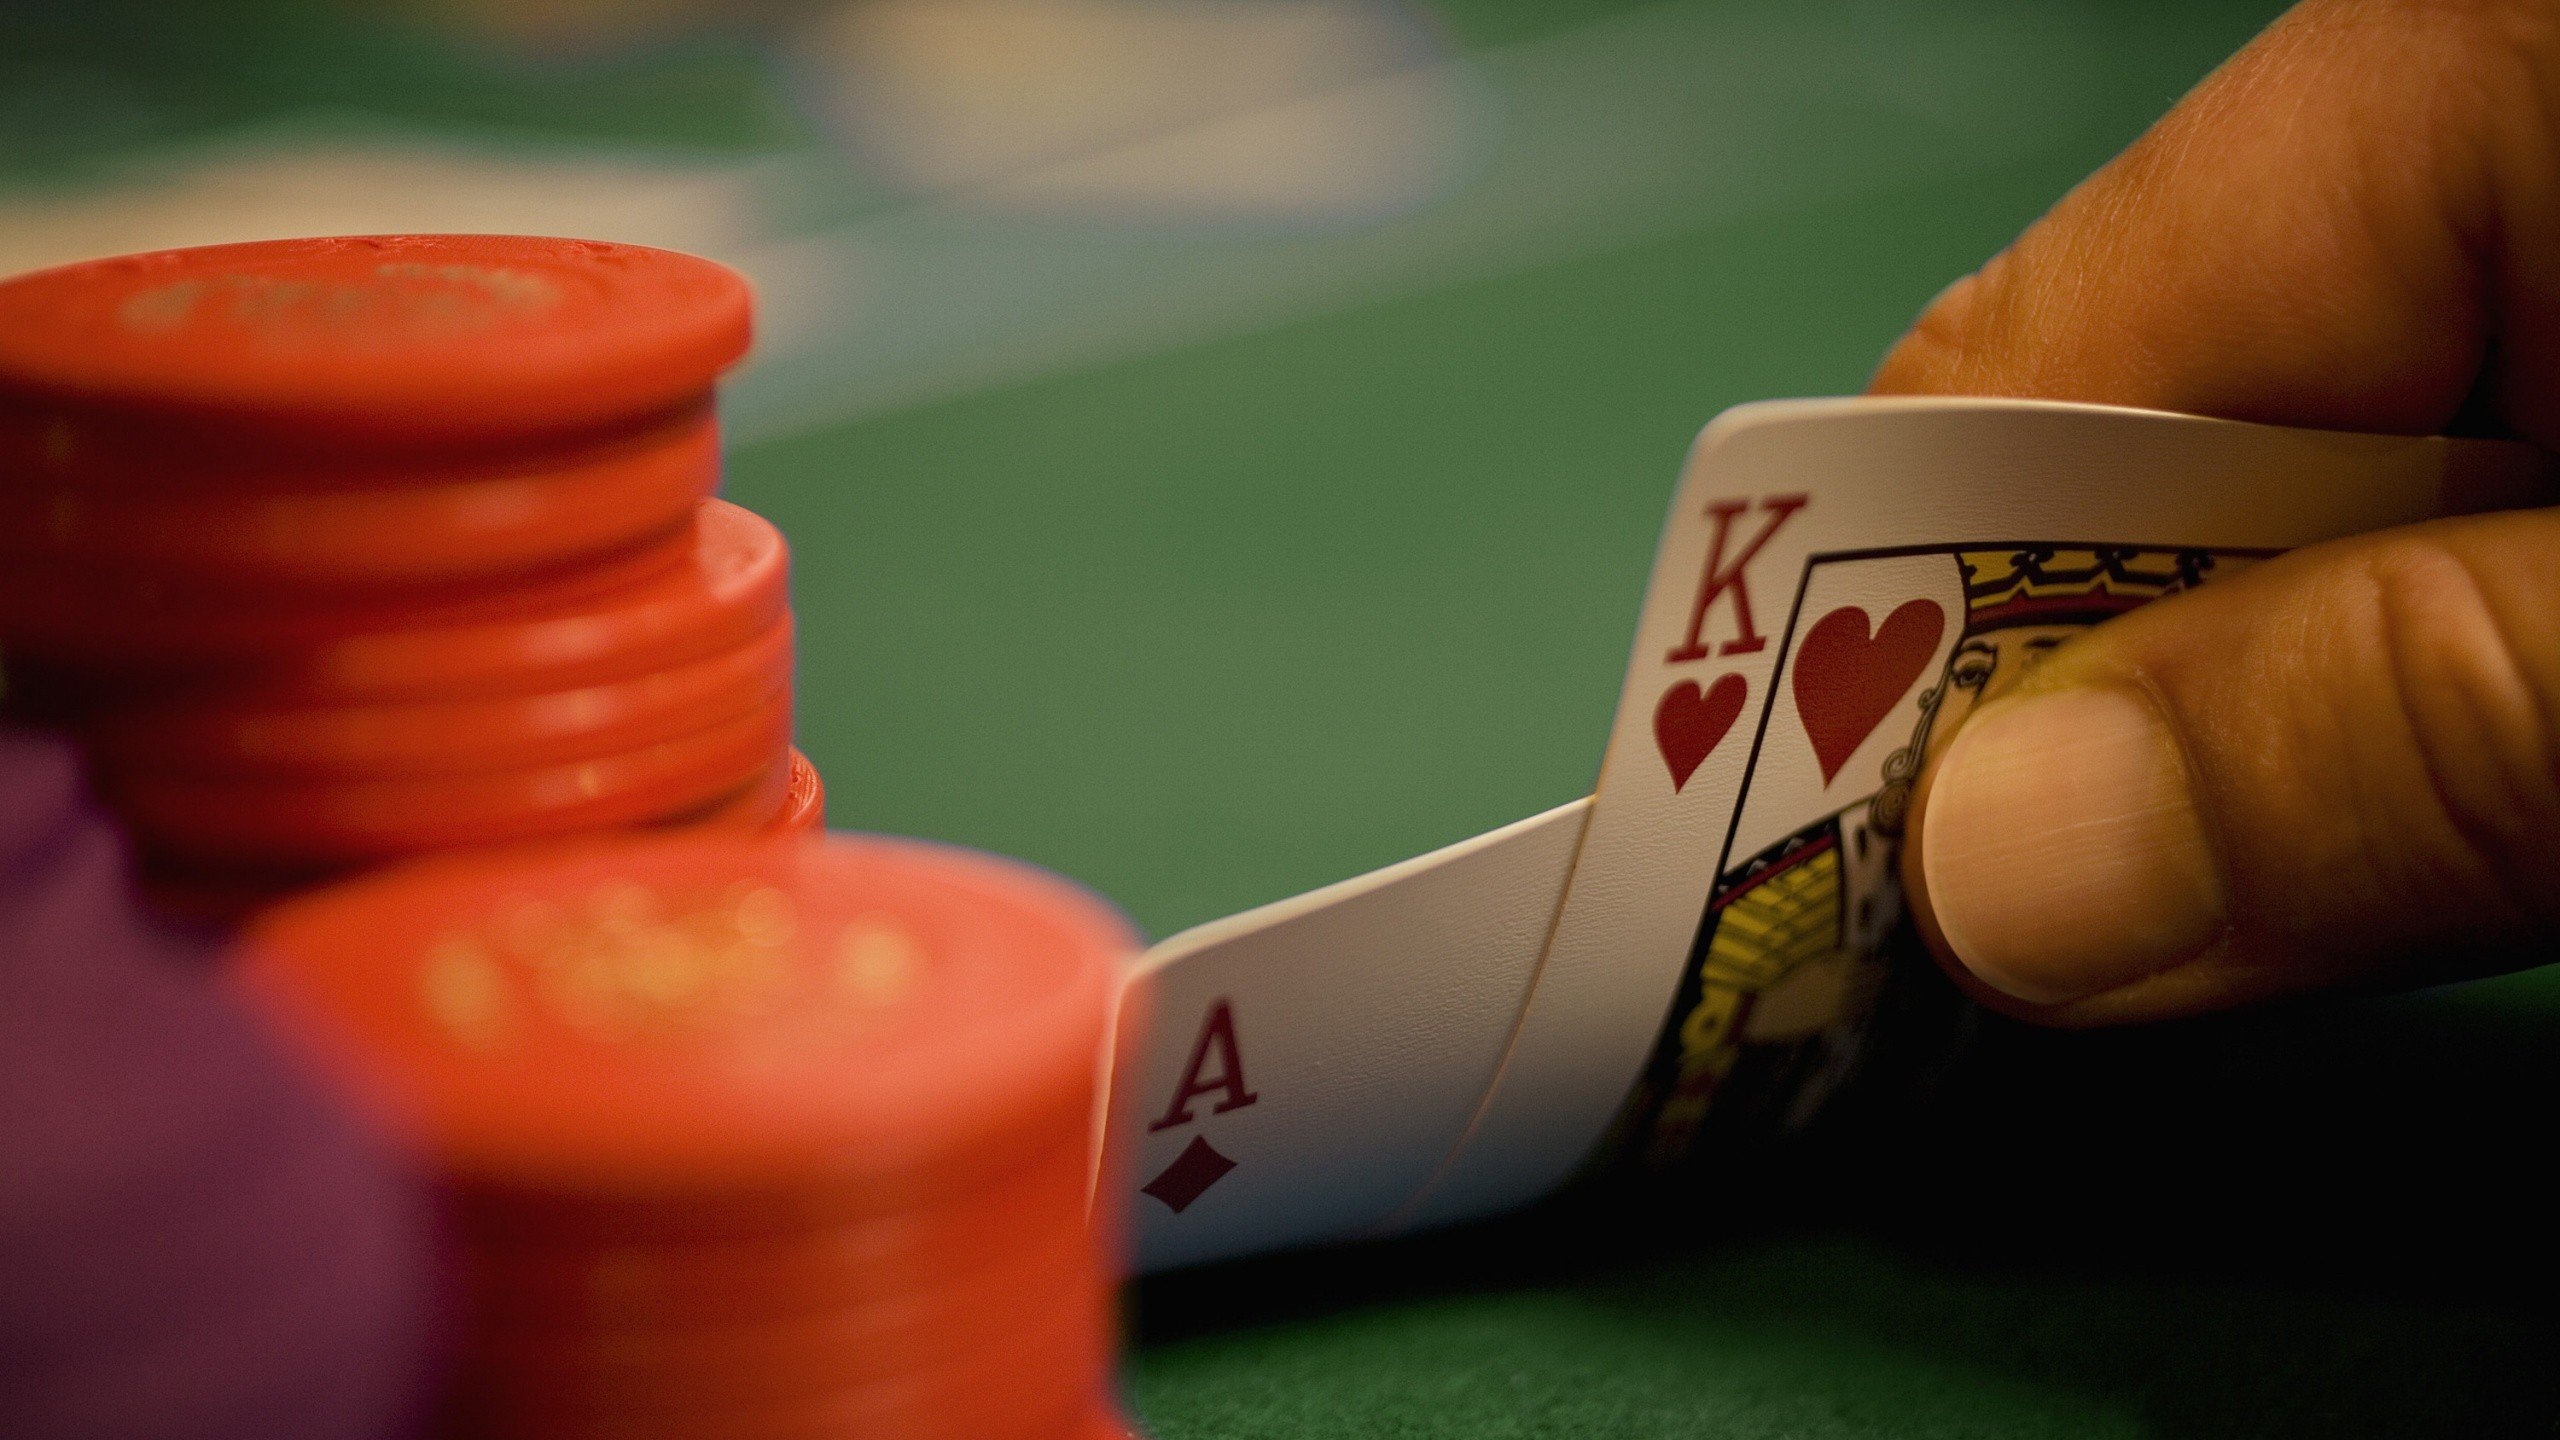 Poker: Ace-King, Suited, A very strong starting hand, No-Limit Holdem Poker. 2560x1440 HD Wallpaper.